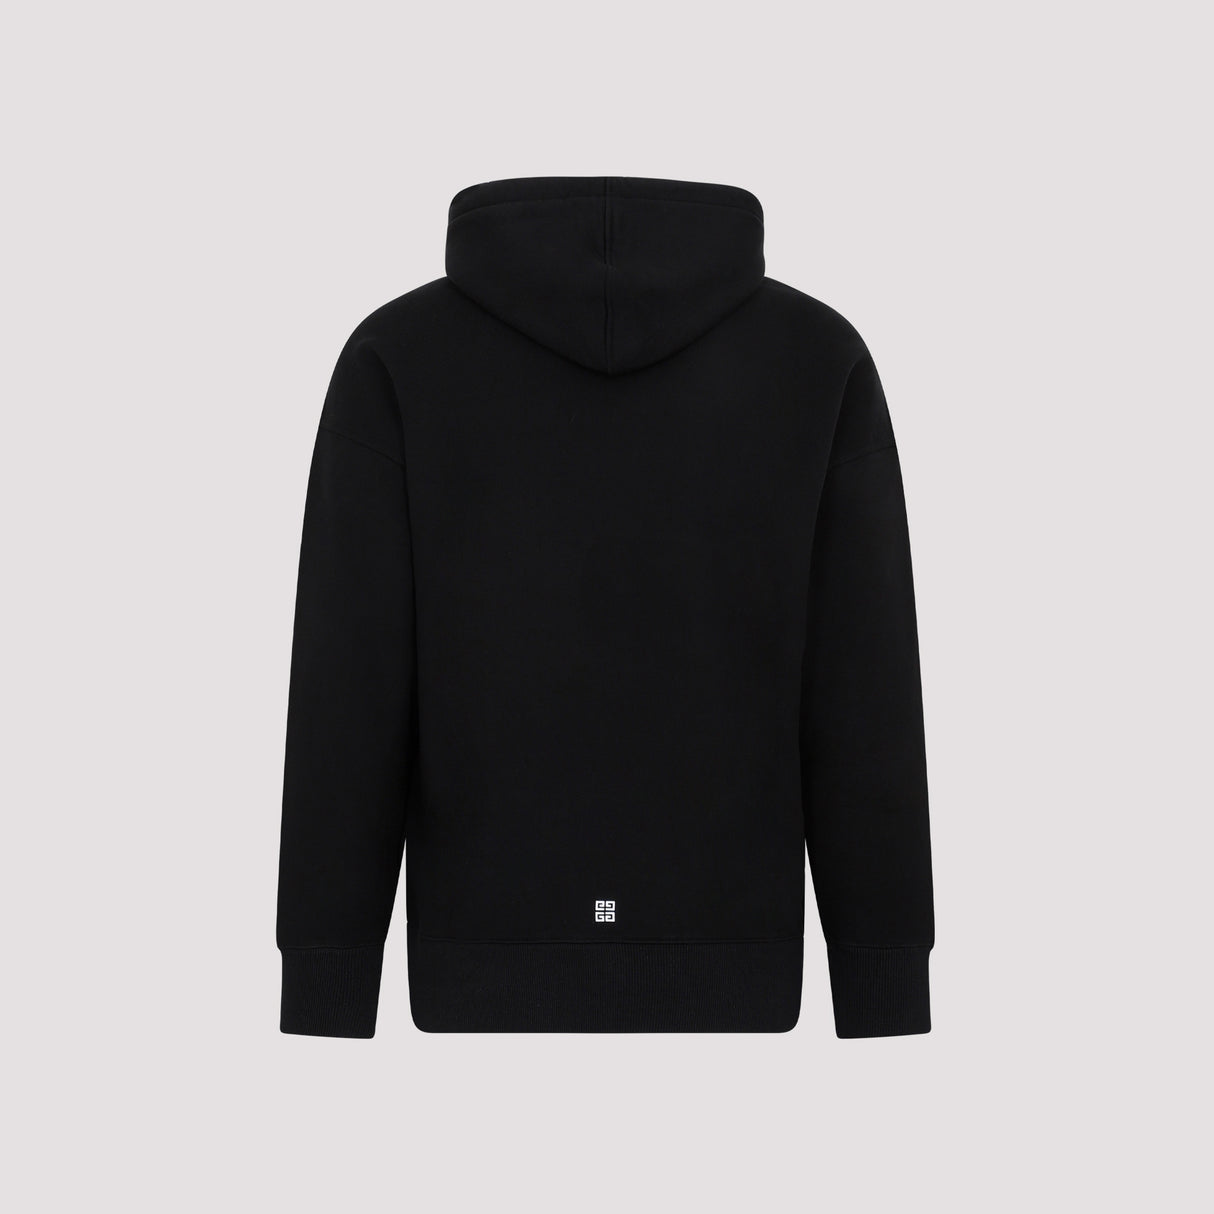 GIVENCHY Black Slim Fit Hoodie for Men - SS24 Collection